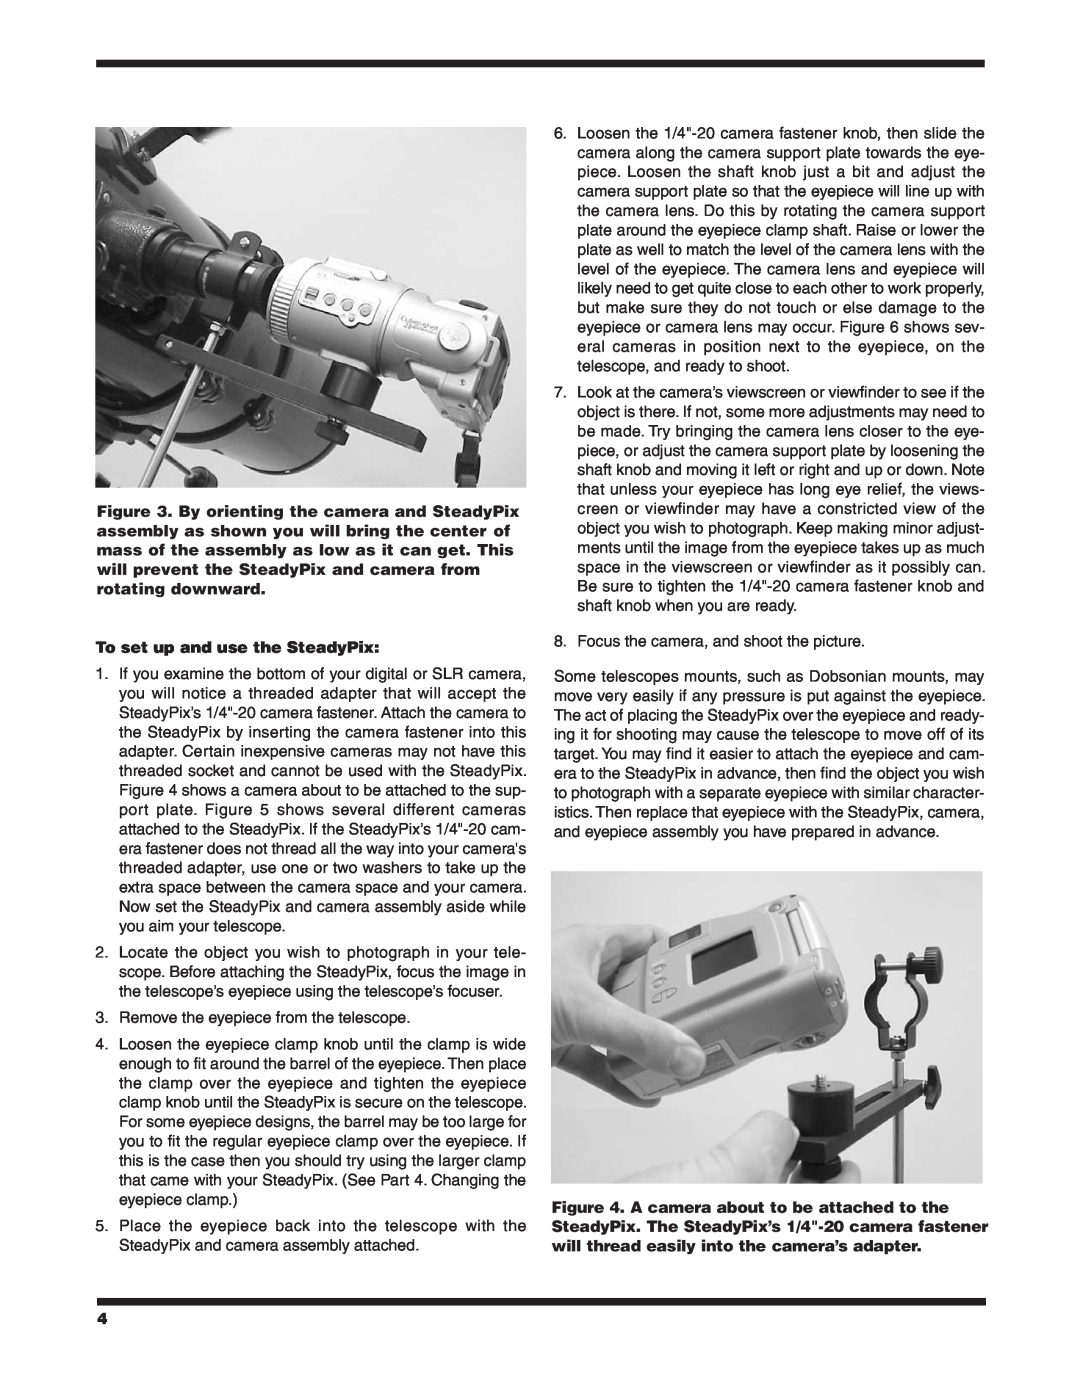 Orion 5228 instruction manual To set up and use the SteadyPix 